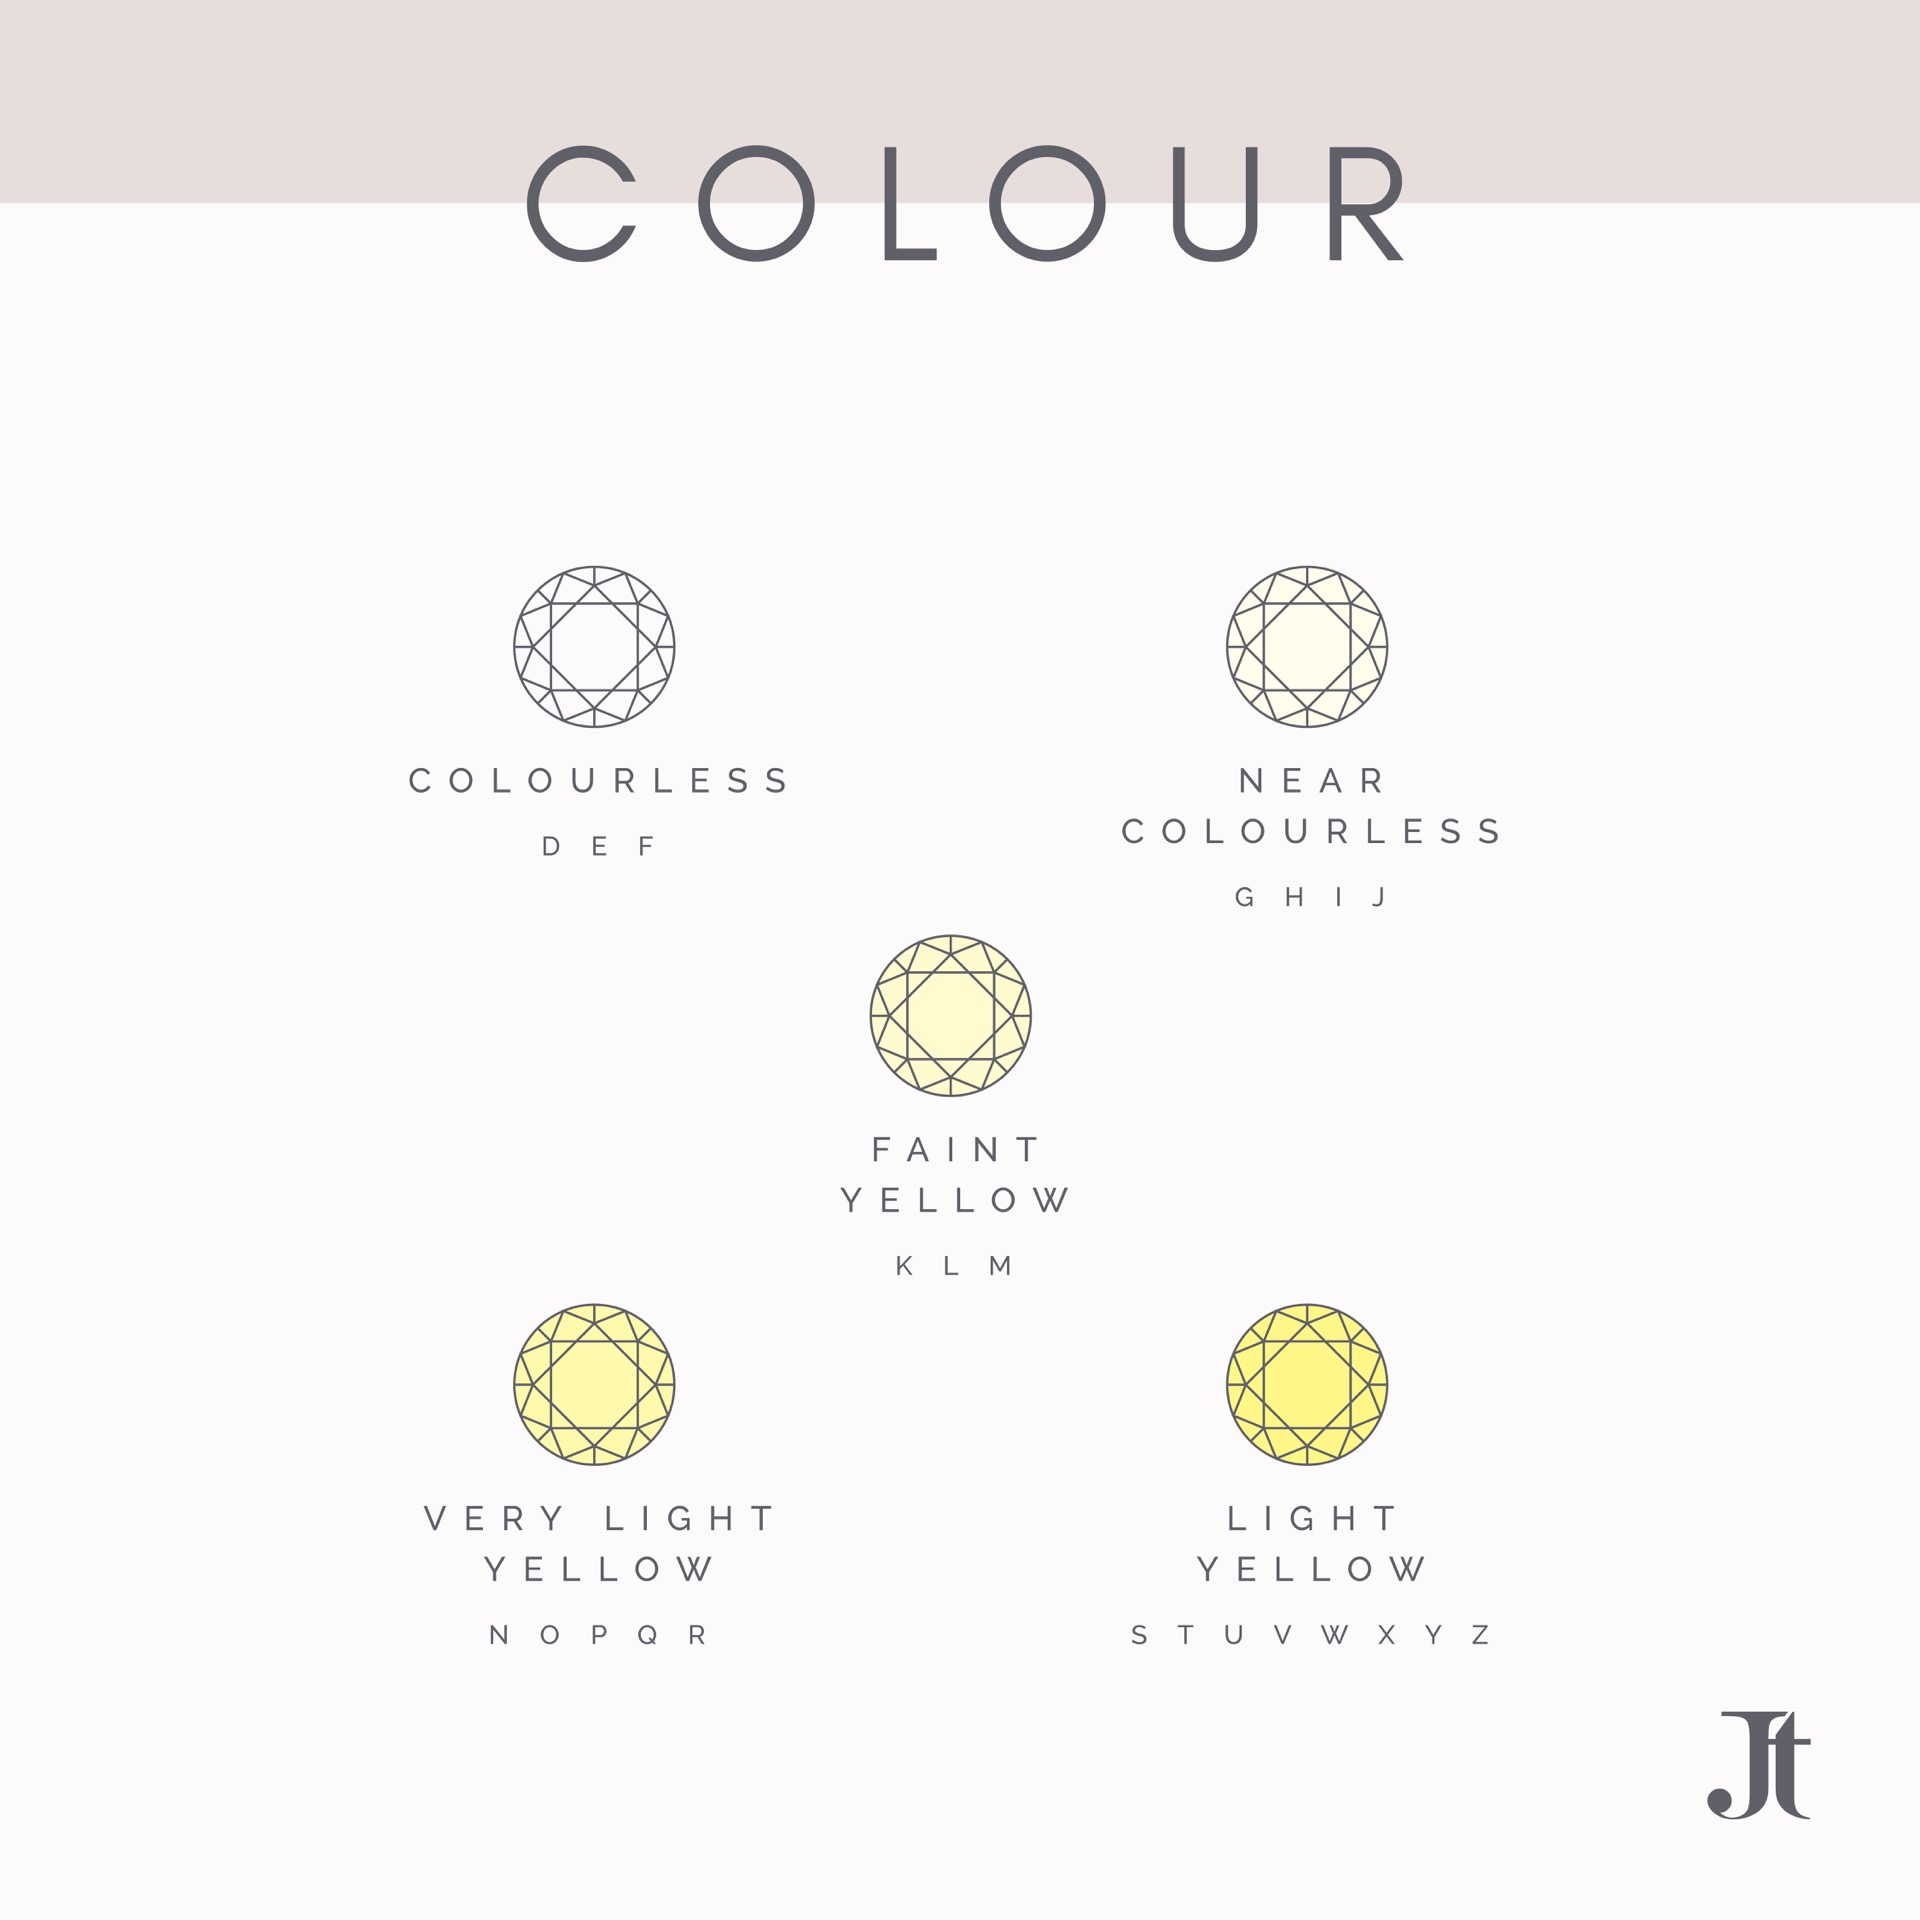 Bristol Jeweller Jacks Turner's Illustration Of The Diamond Four C's, Showing The Various Colours For Diamonds Used In Her Engagement Rings.